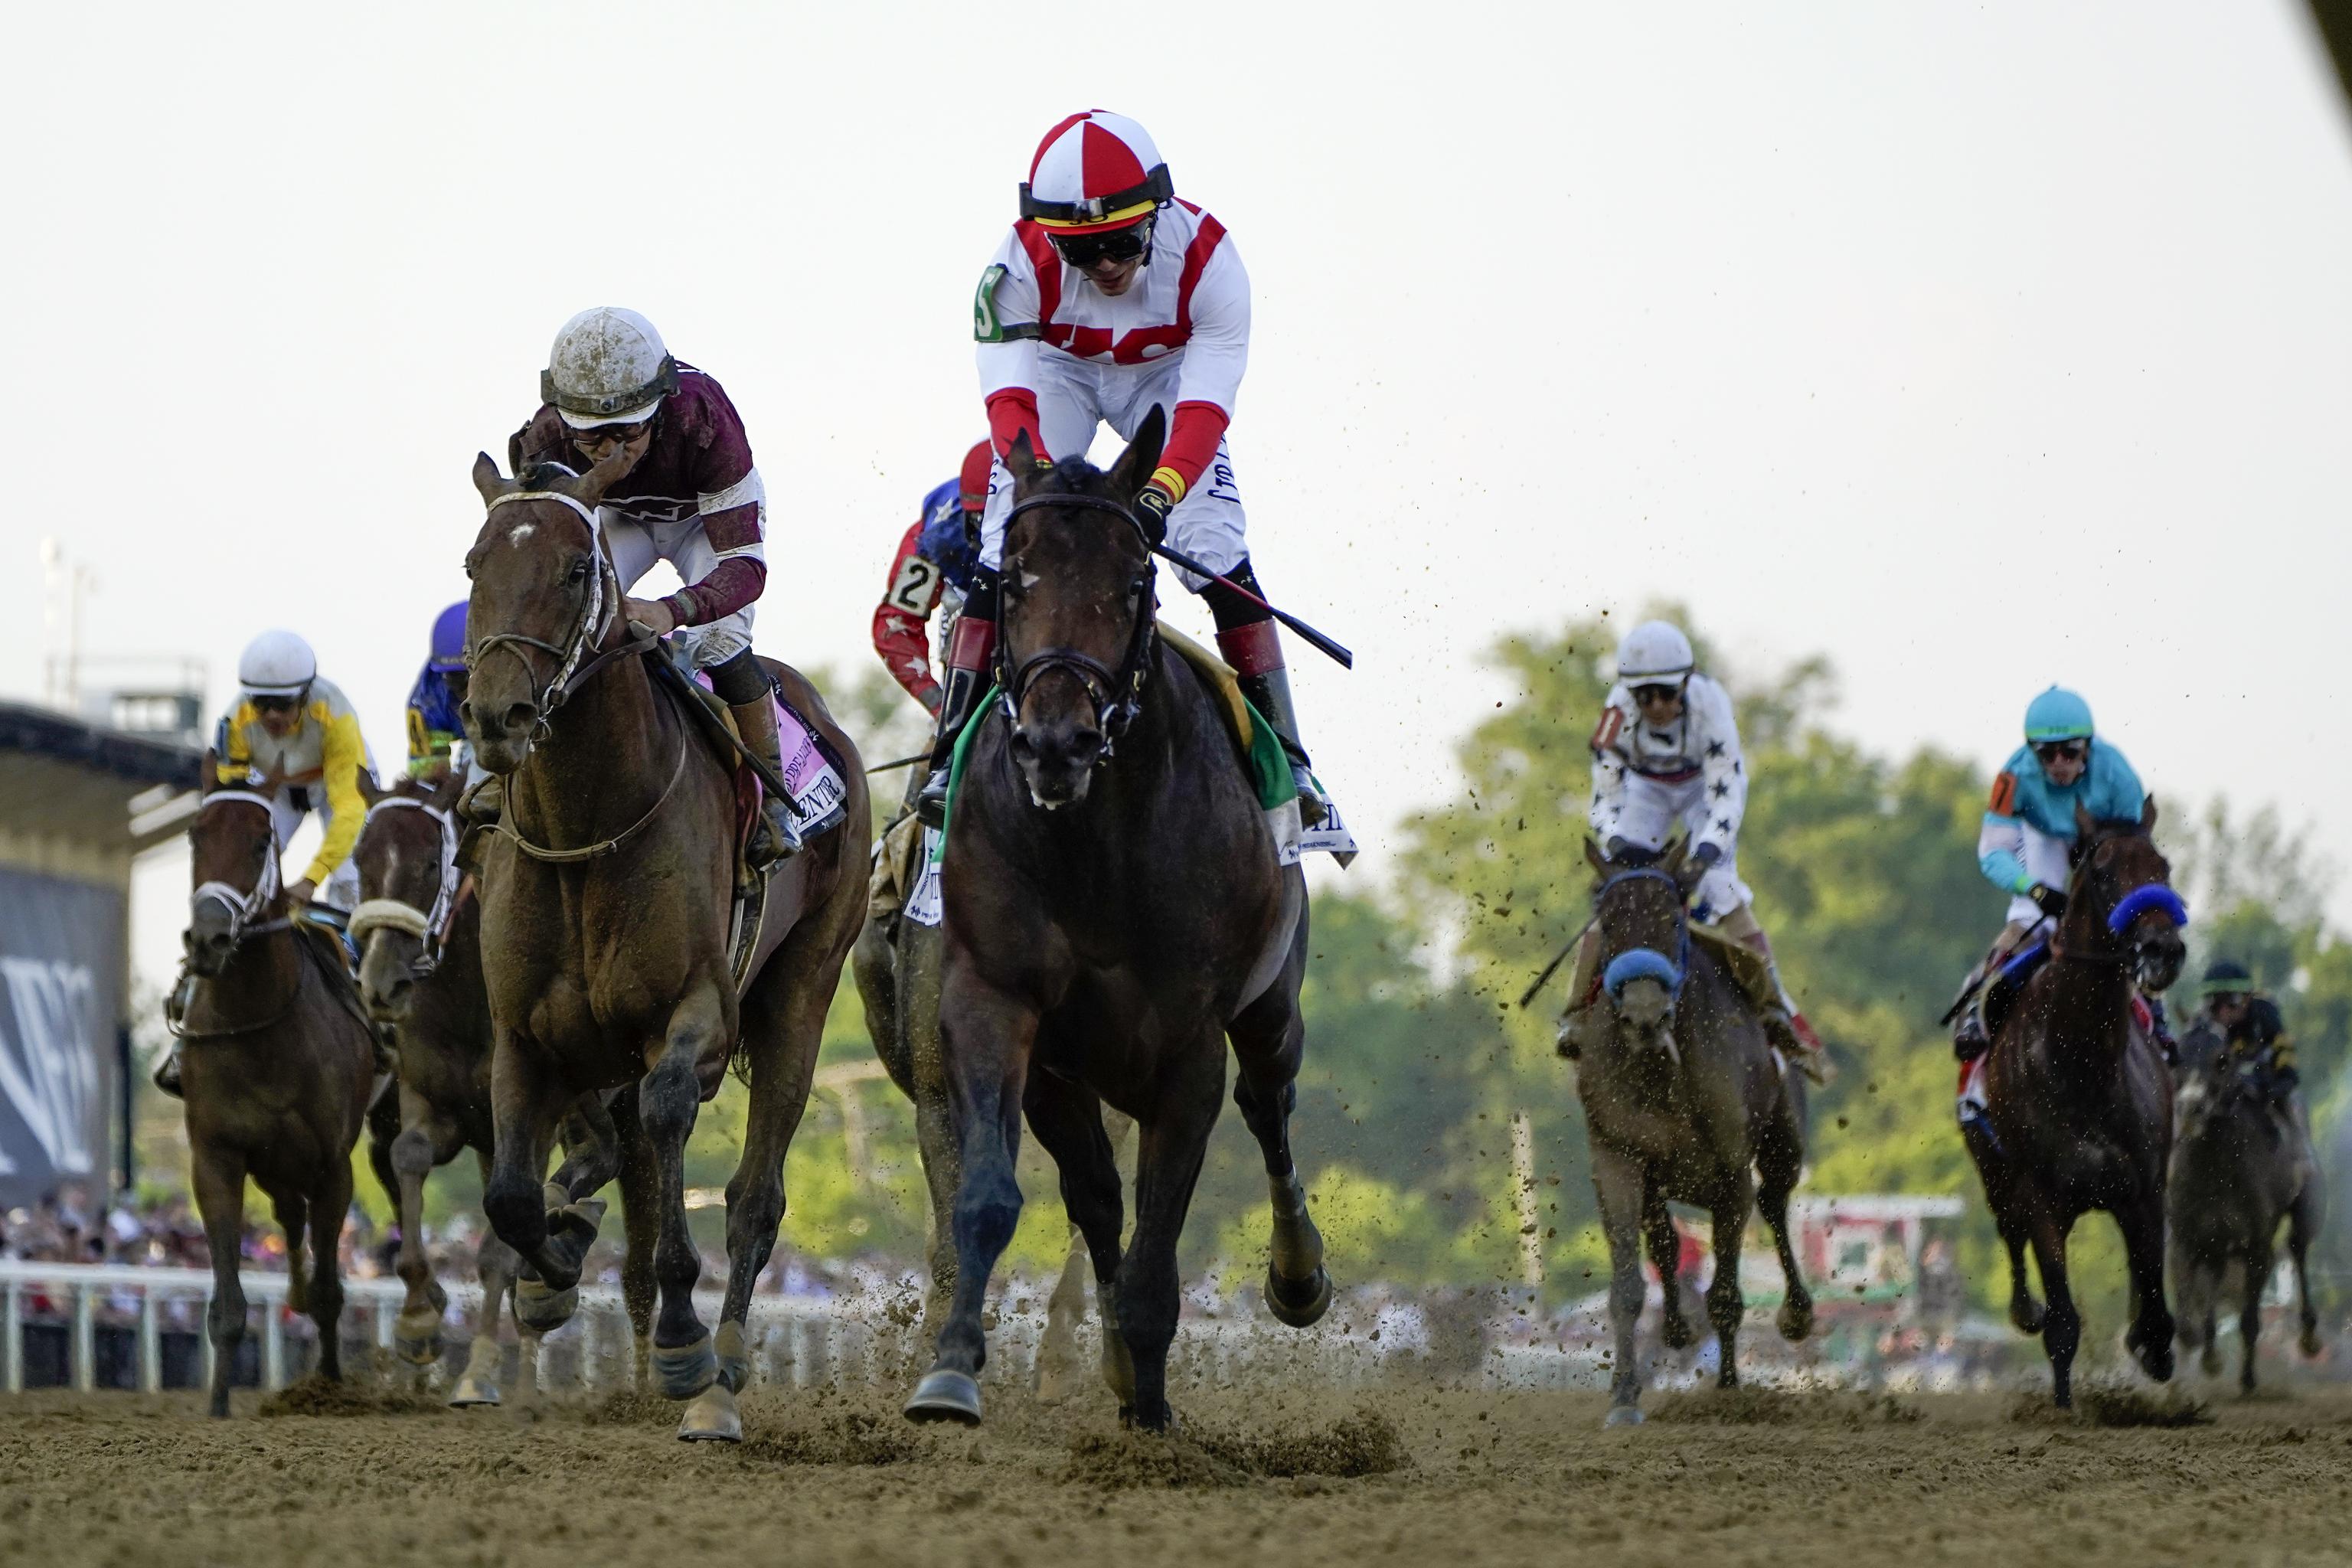 world sports betting results for preakness